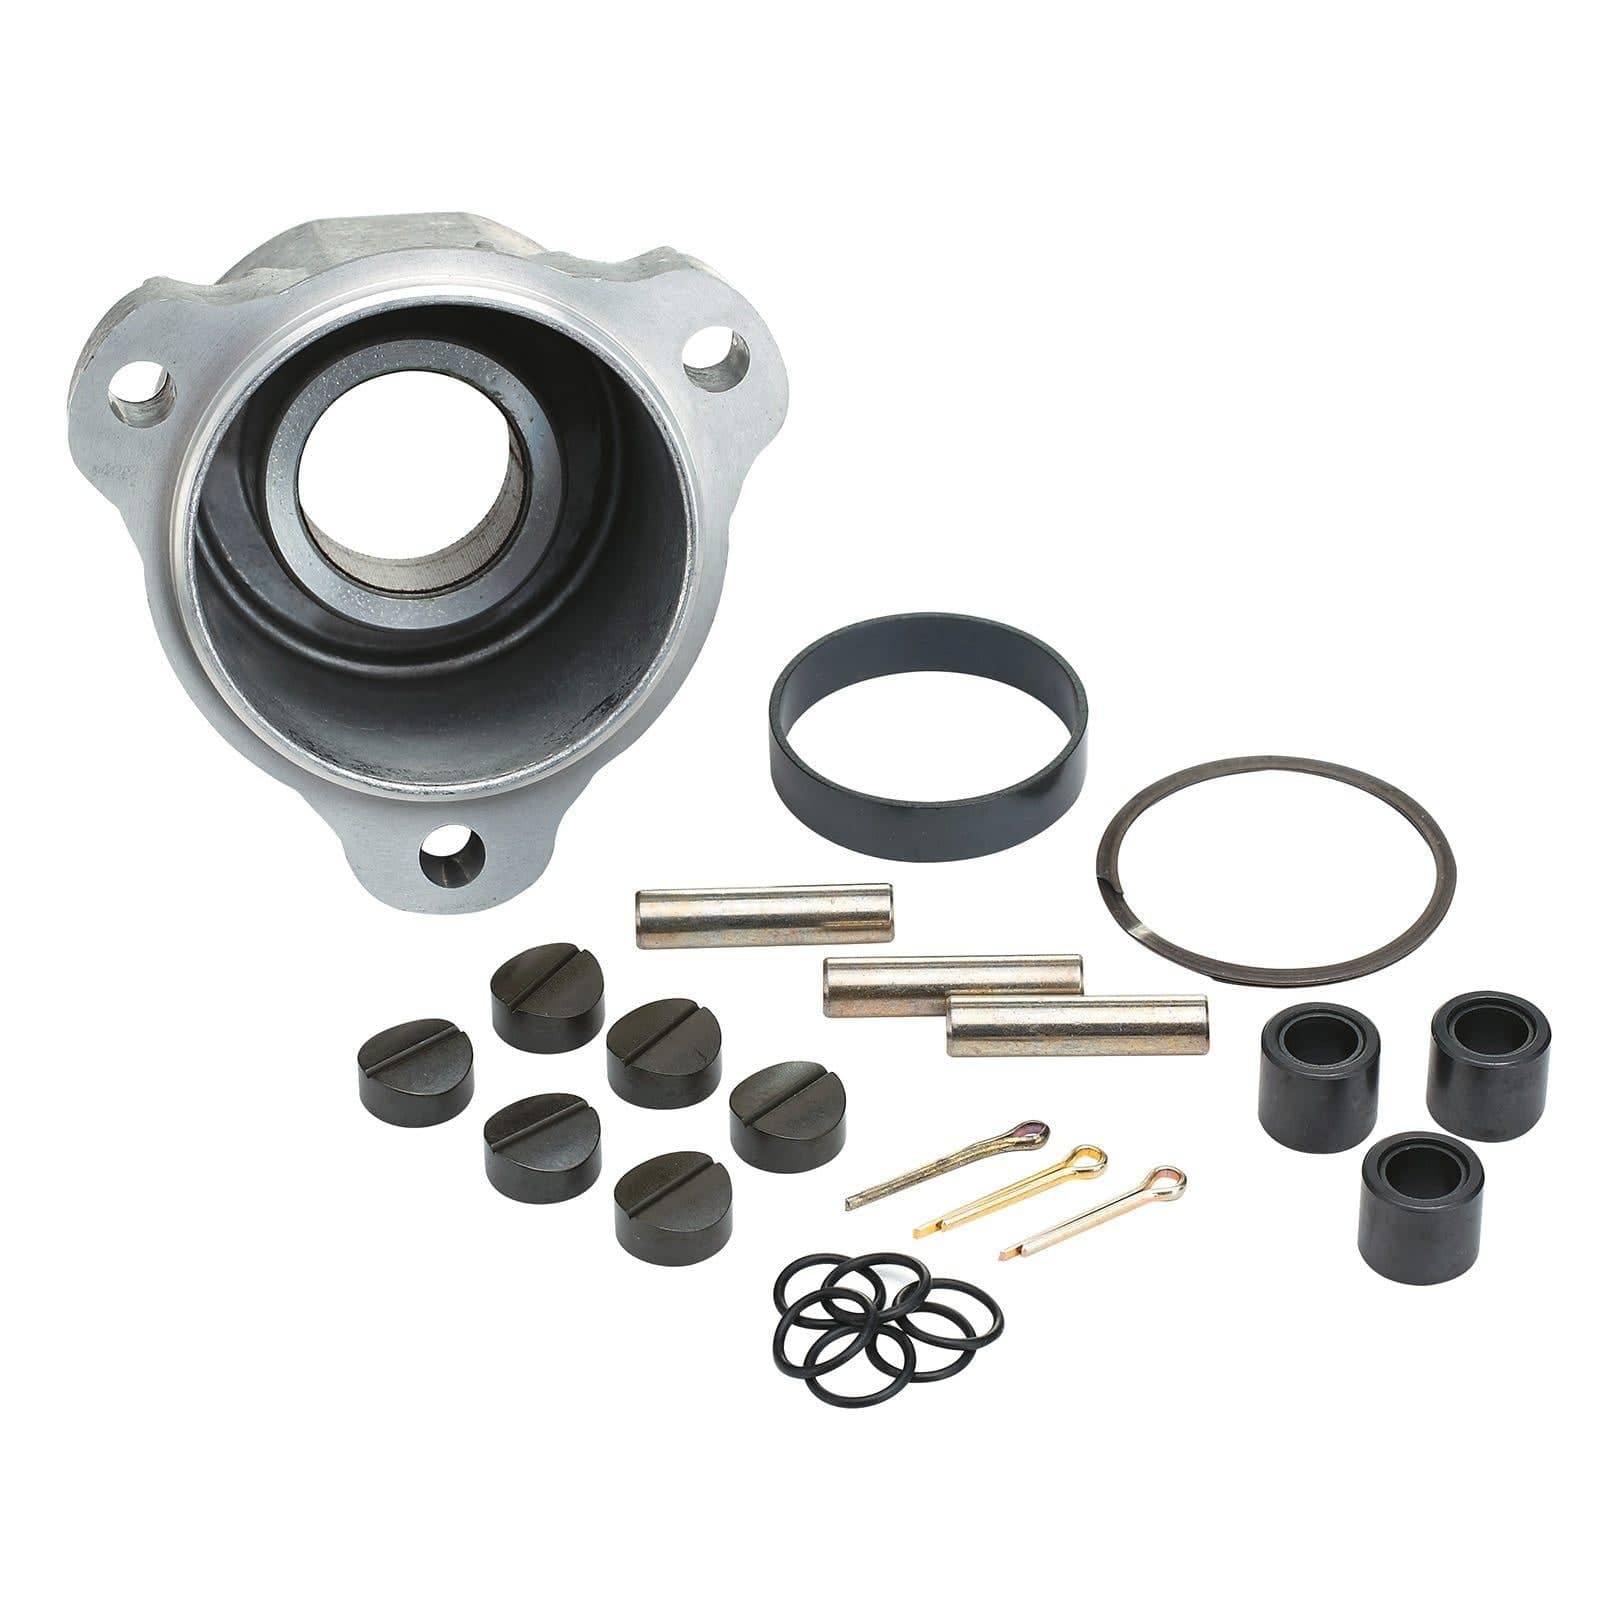 Maintenance Kit for TRA Drive Pulley - 2011 to 2018 (800R P-TEK & 800R E-TEC) - Factory Recreation